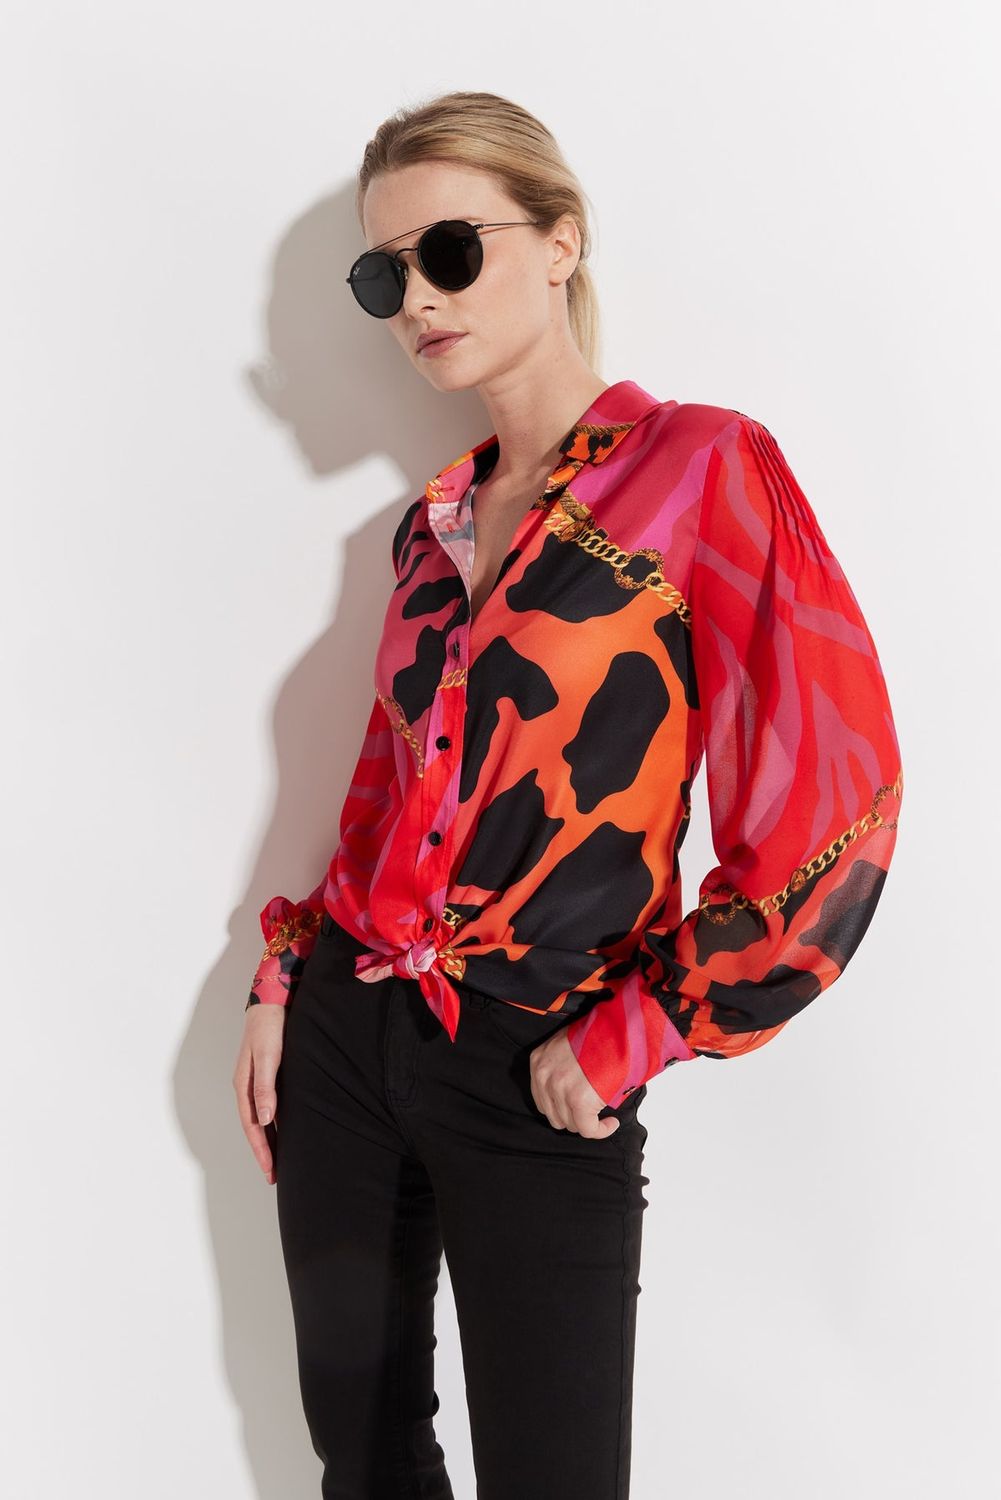 OOLALA Printed Button Front Tie Shirt, Color: Fuchsia, Size: S